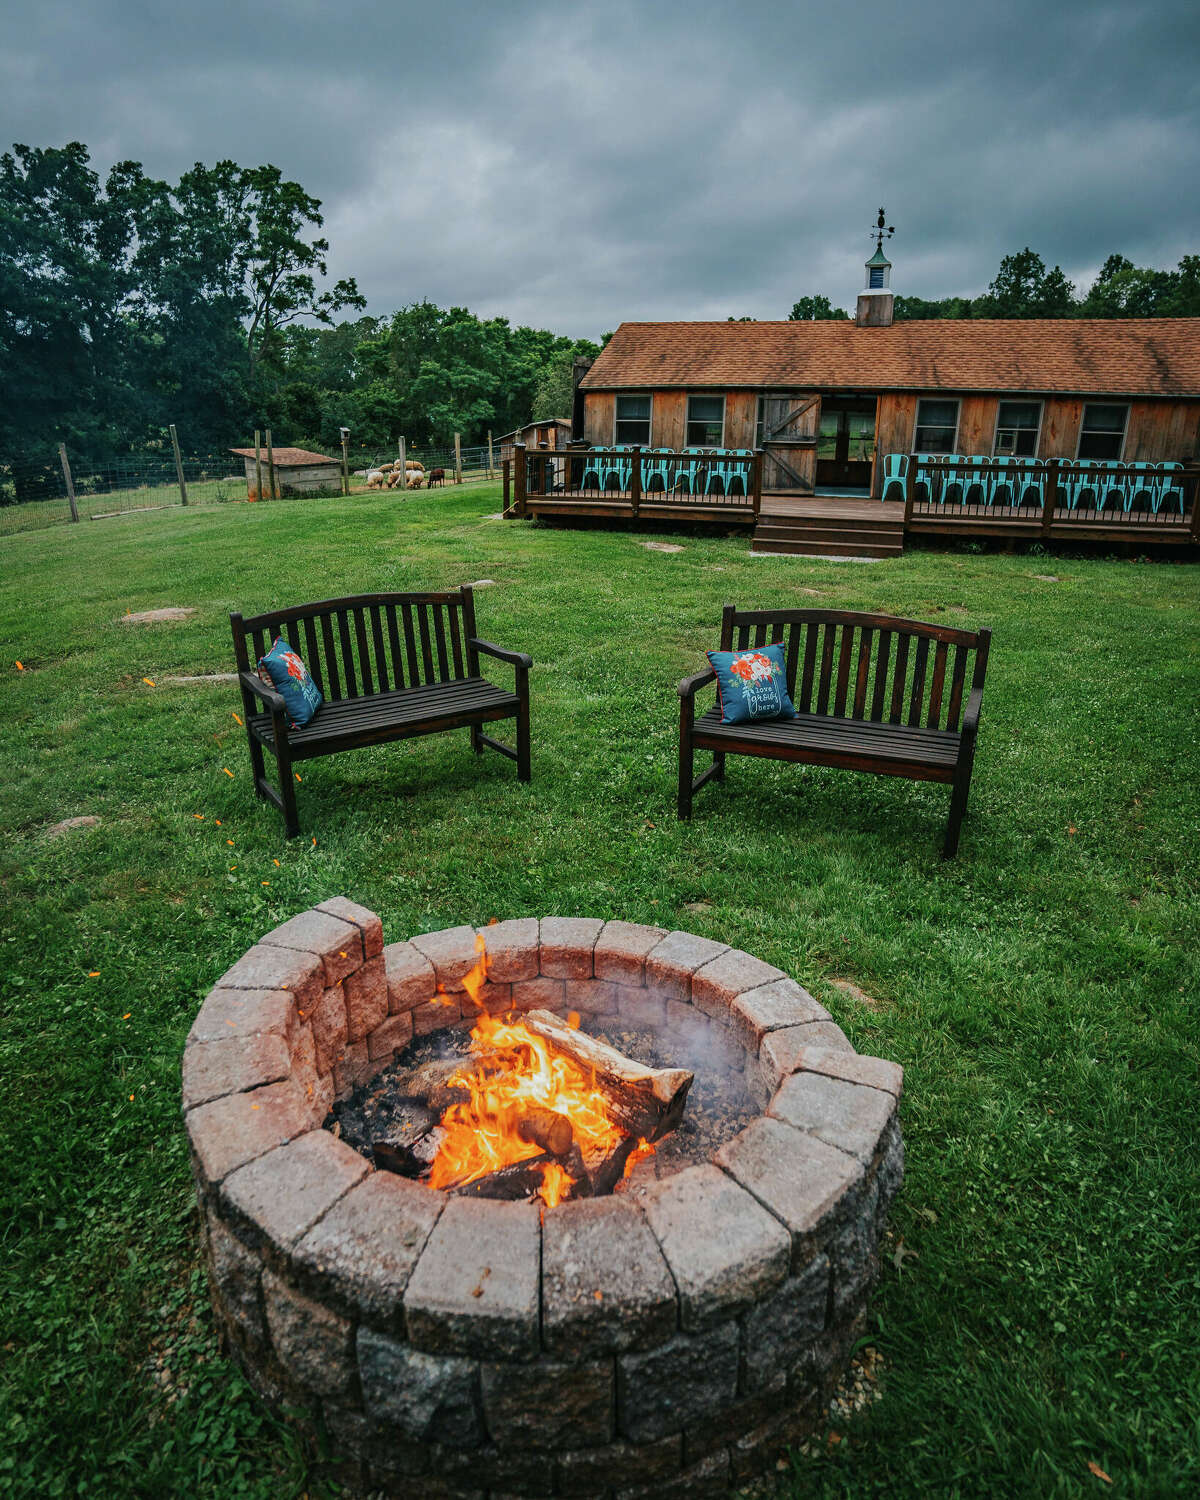 A stone firepit with an open fire two wooden benches. Behind that is a wood cabin with a long deck and an animal pen, with trees in the background.